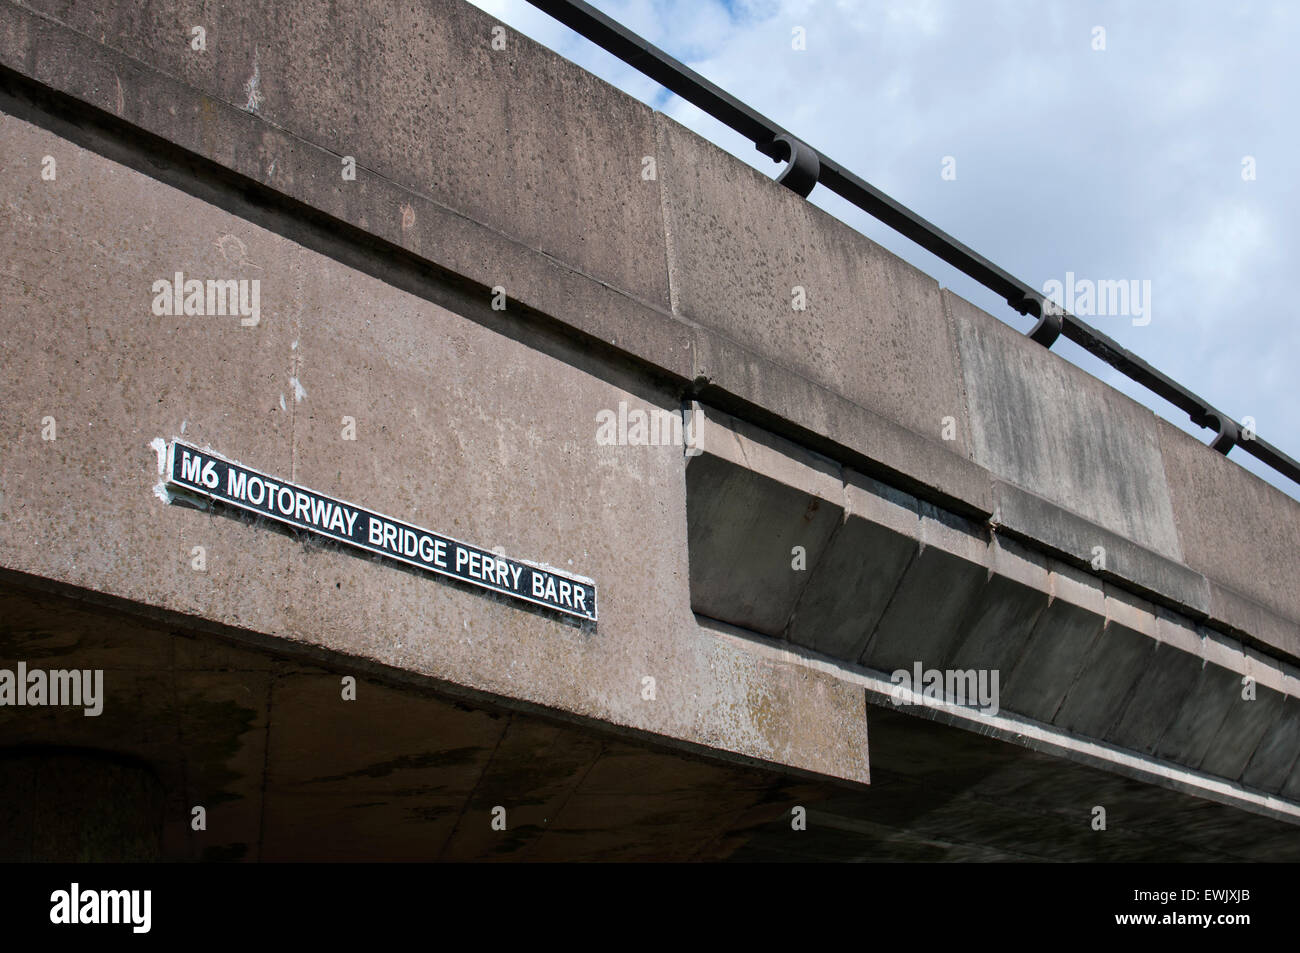 M6 motorway flyover at Perry Barr Locks, Tame Valley Canal, Perry Barr, Birmingham, UK Stock Photo